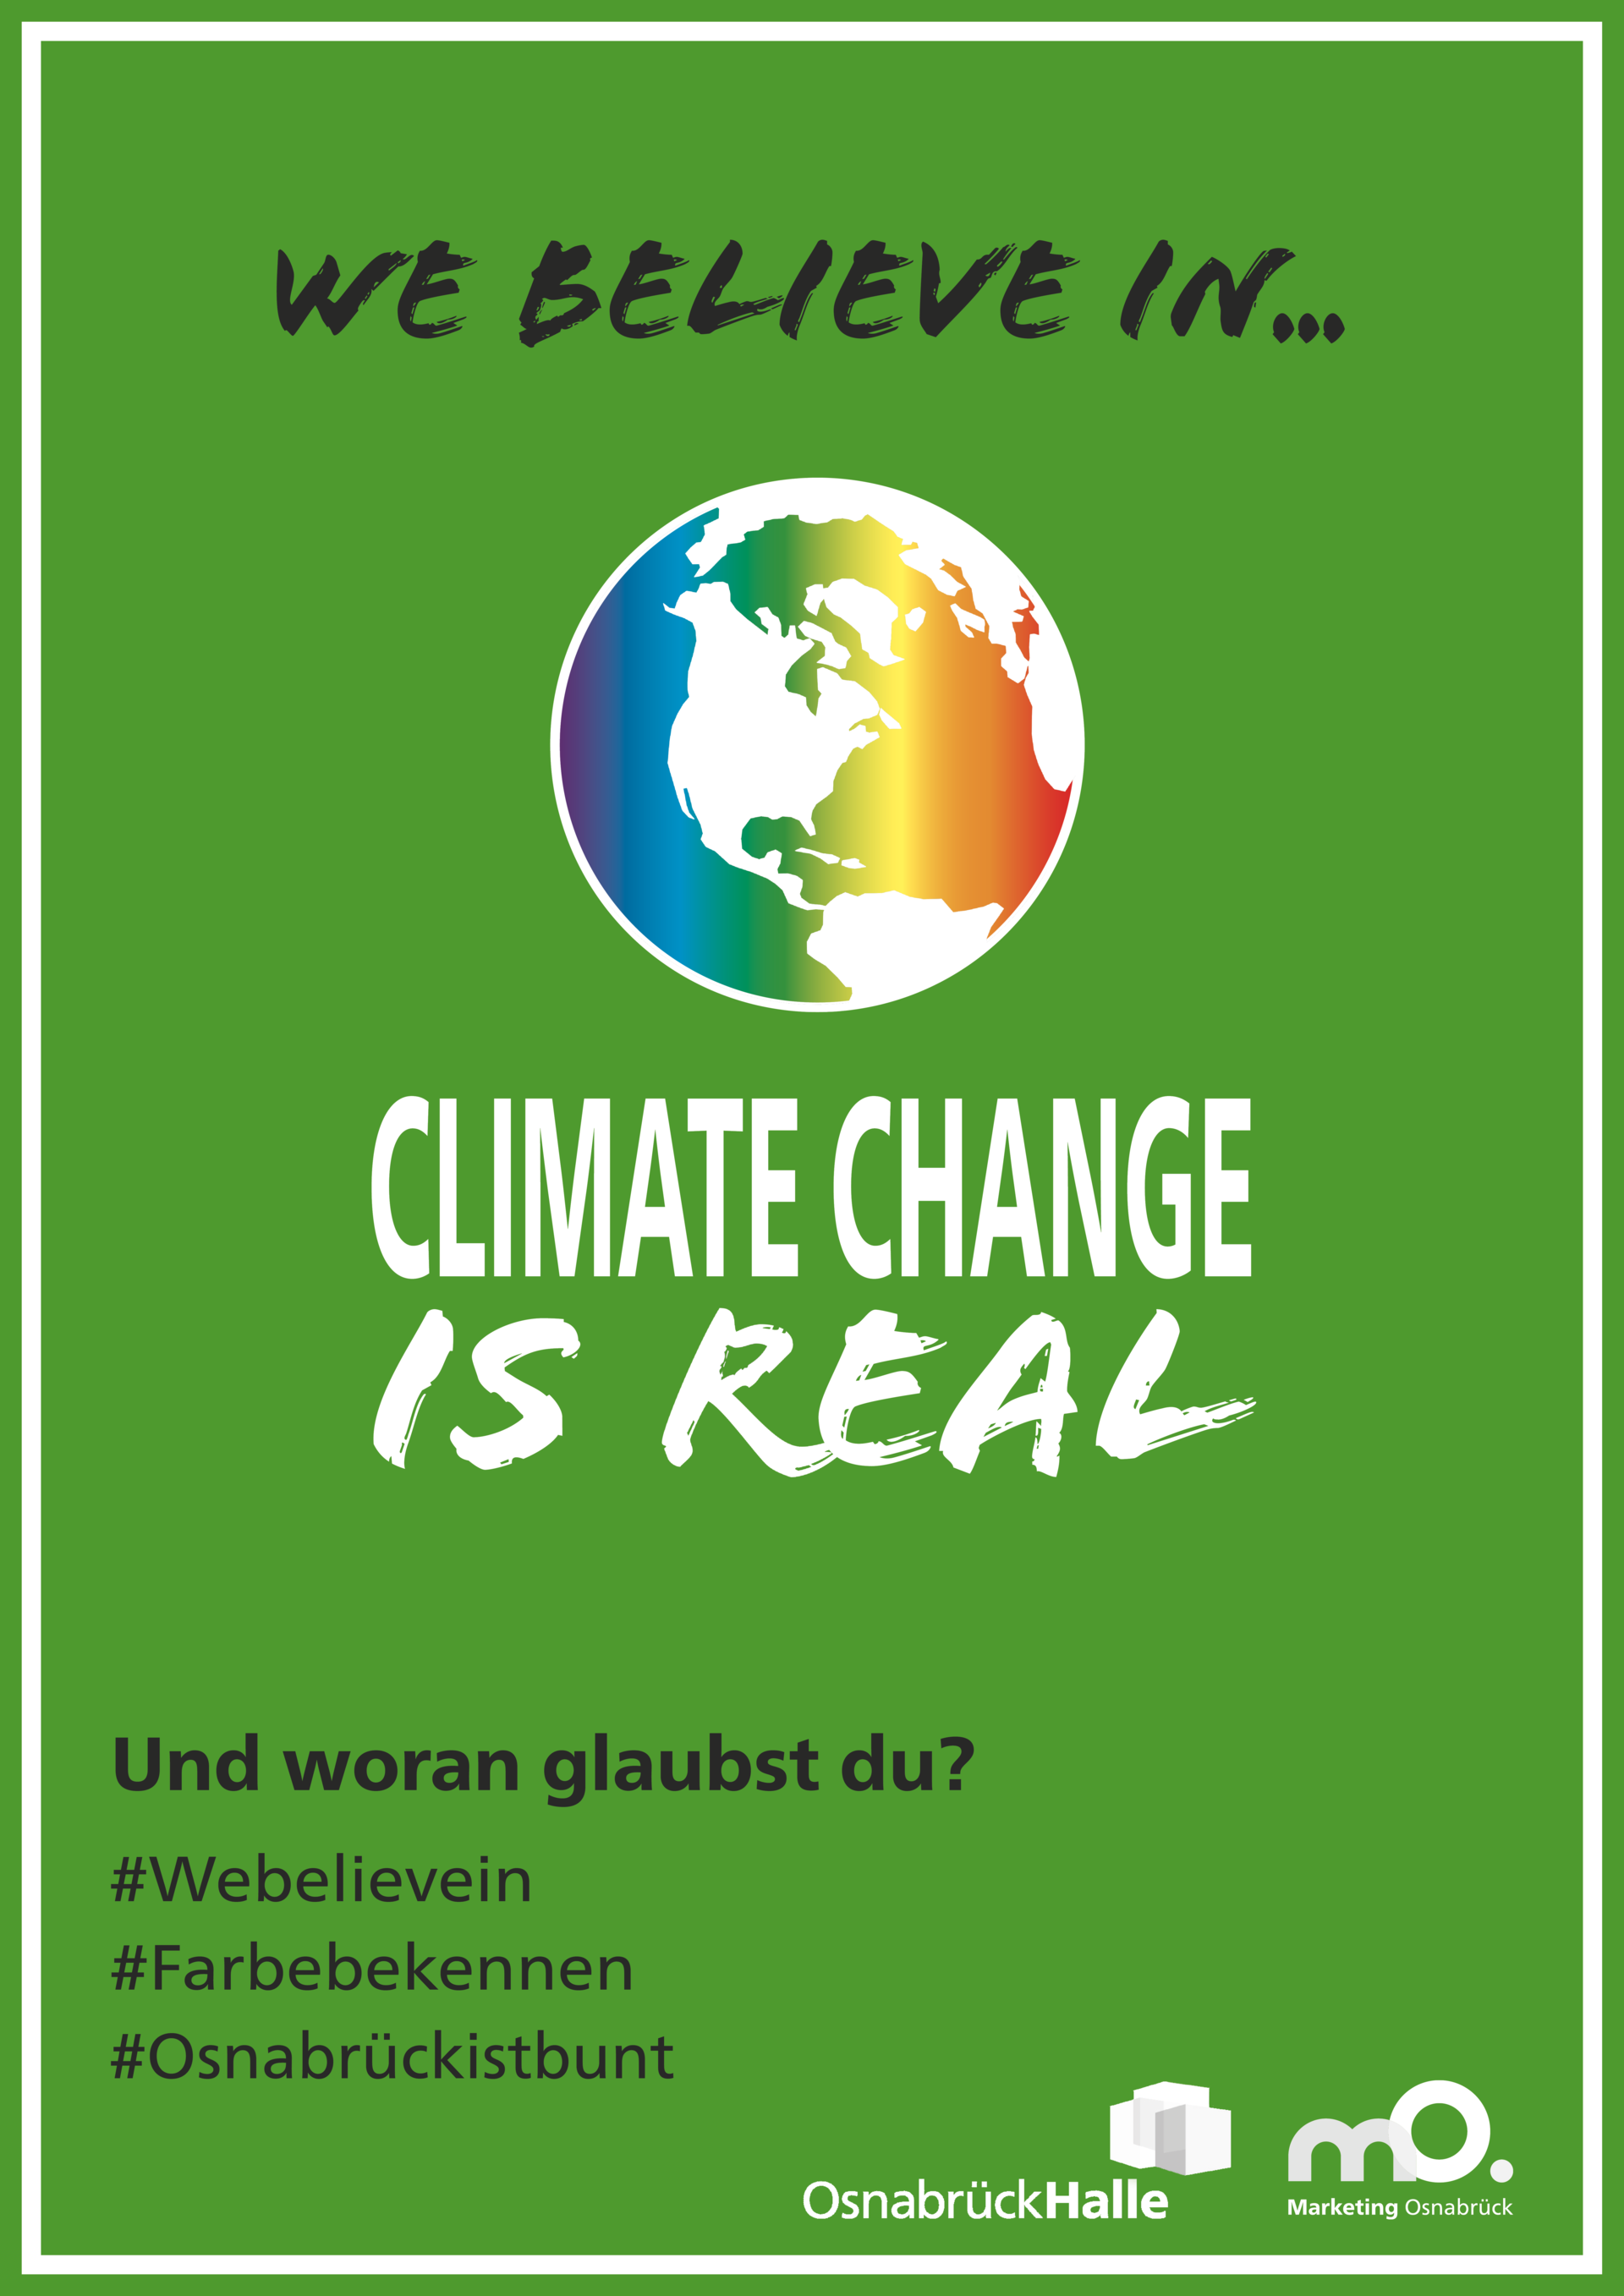 We believe in Climate Change is Real